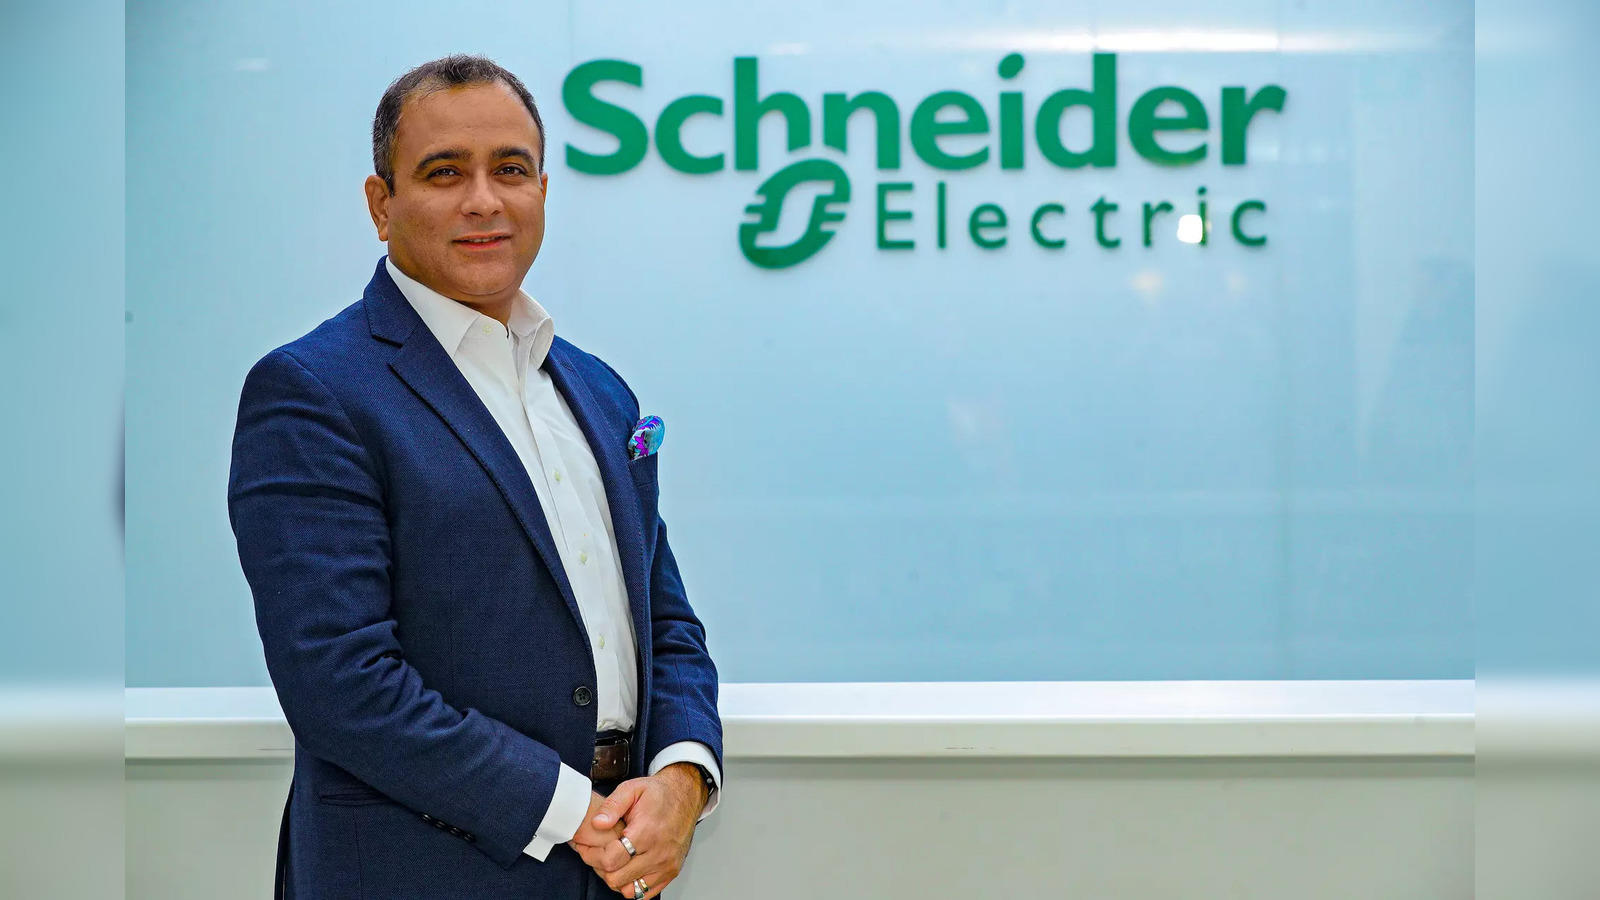 schneider electric india: Schneider Electric India lines up Rs 3,200 cr  capex by 2026: CEO & MD Deepak Sharma - The Economic Times